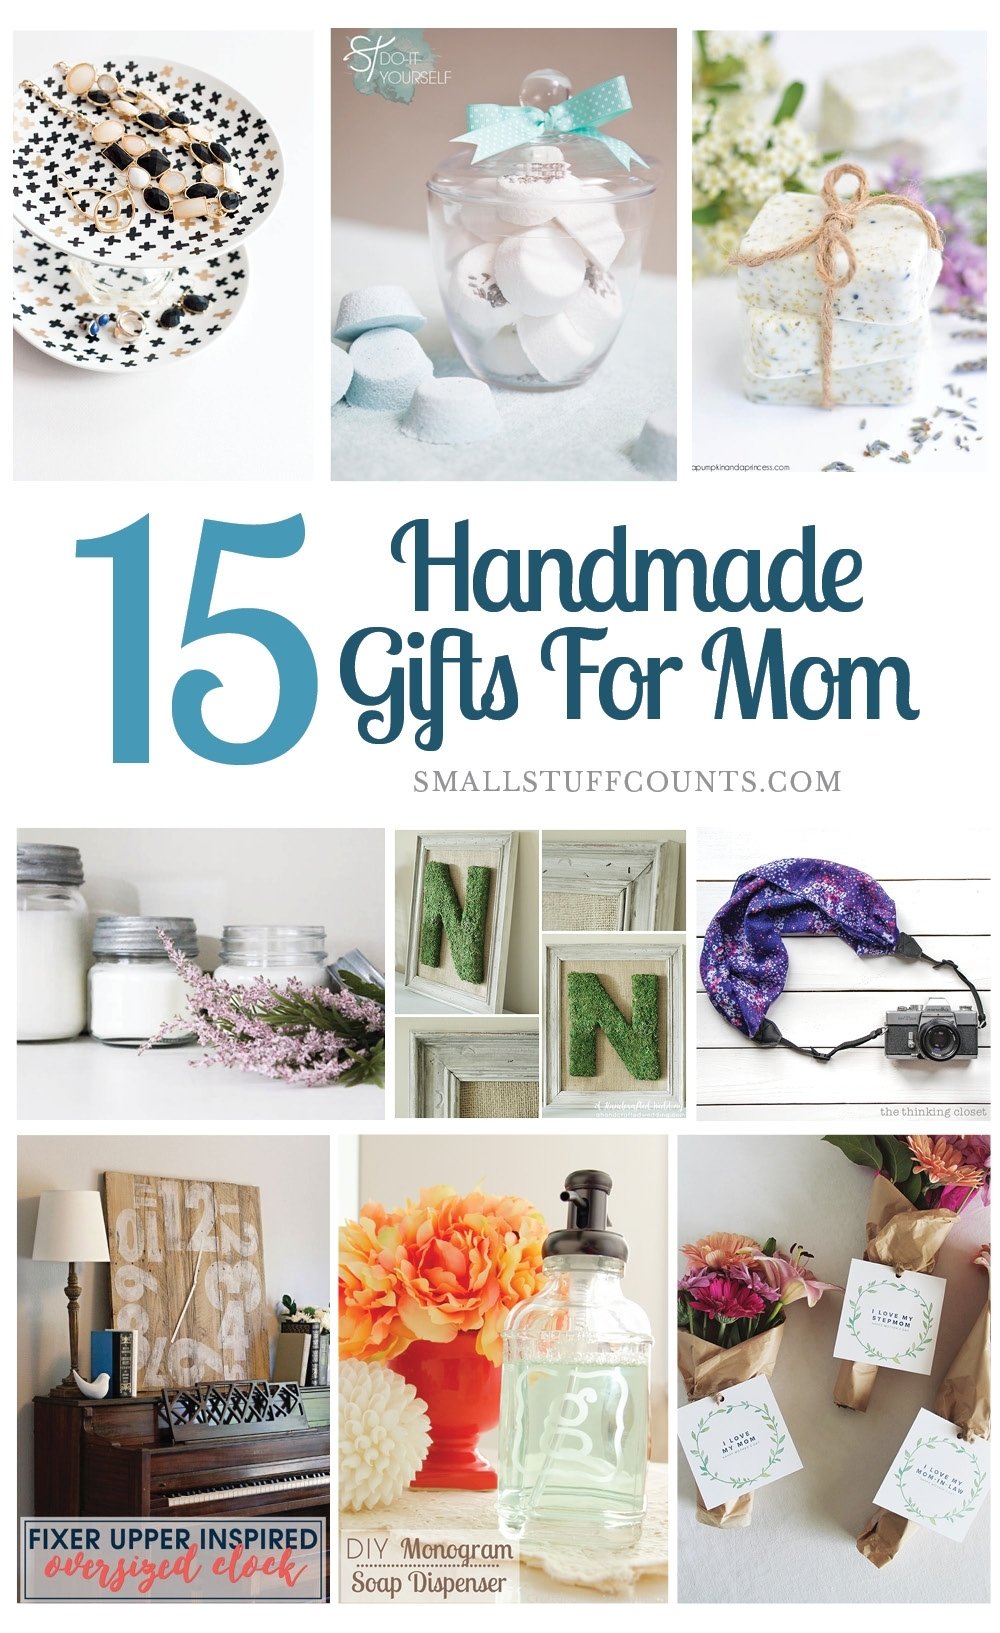 10 Great New Mom Christmas Gift Ideas beautiful diy gift ideas for mom 1 2022